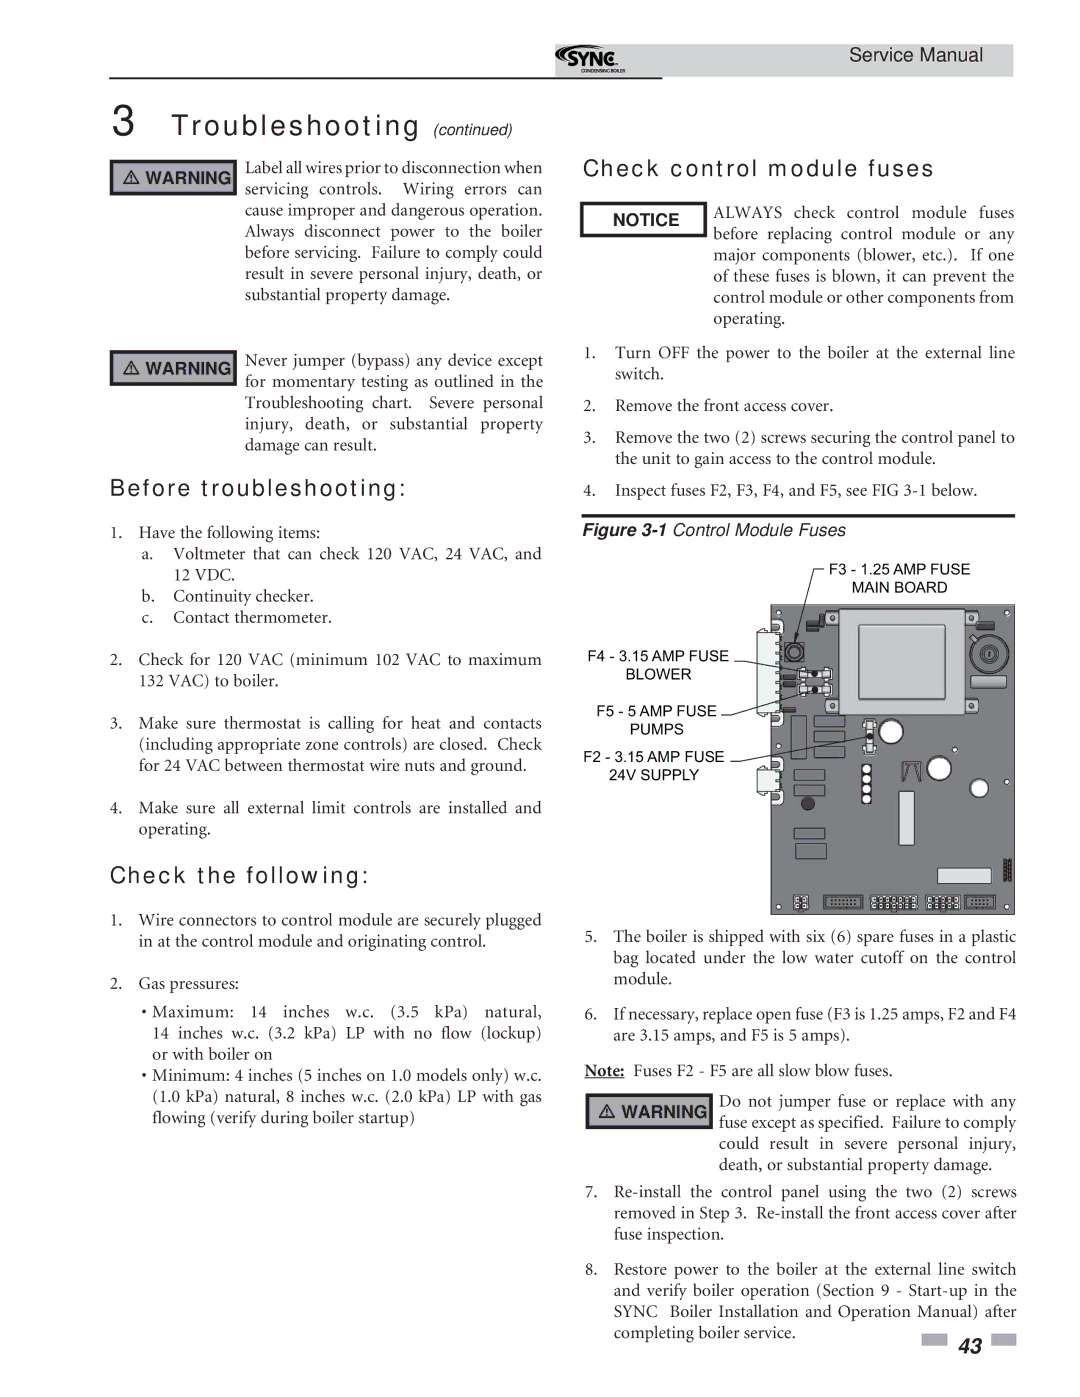 Lochinvar 1 service manual Before troubleshooting, Check the following, Check control module fuses 